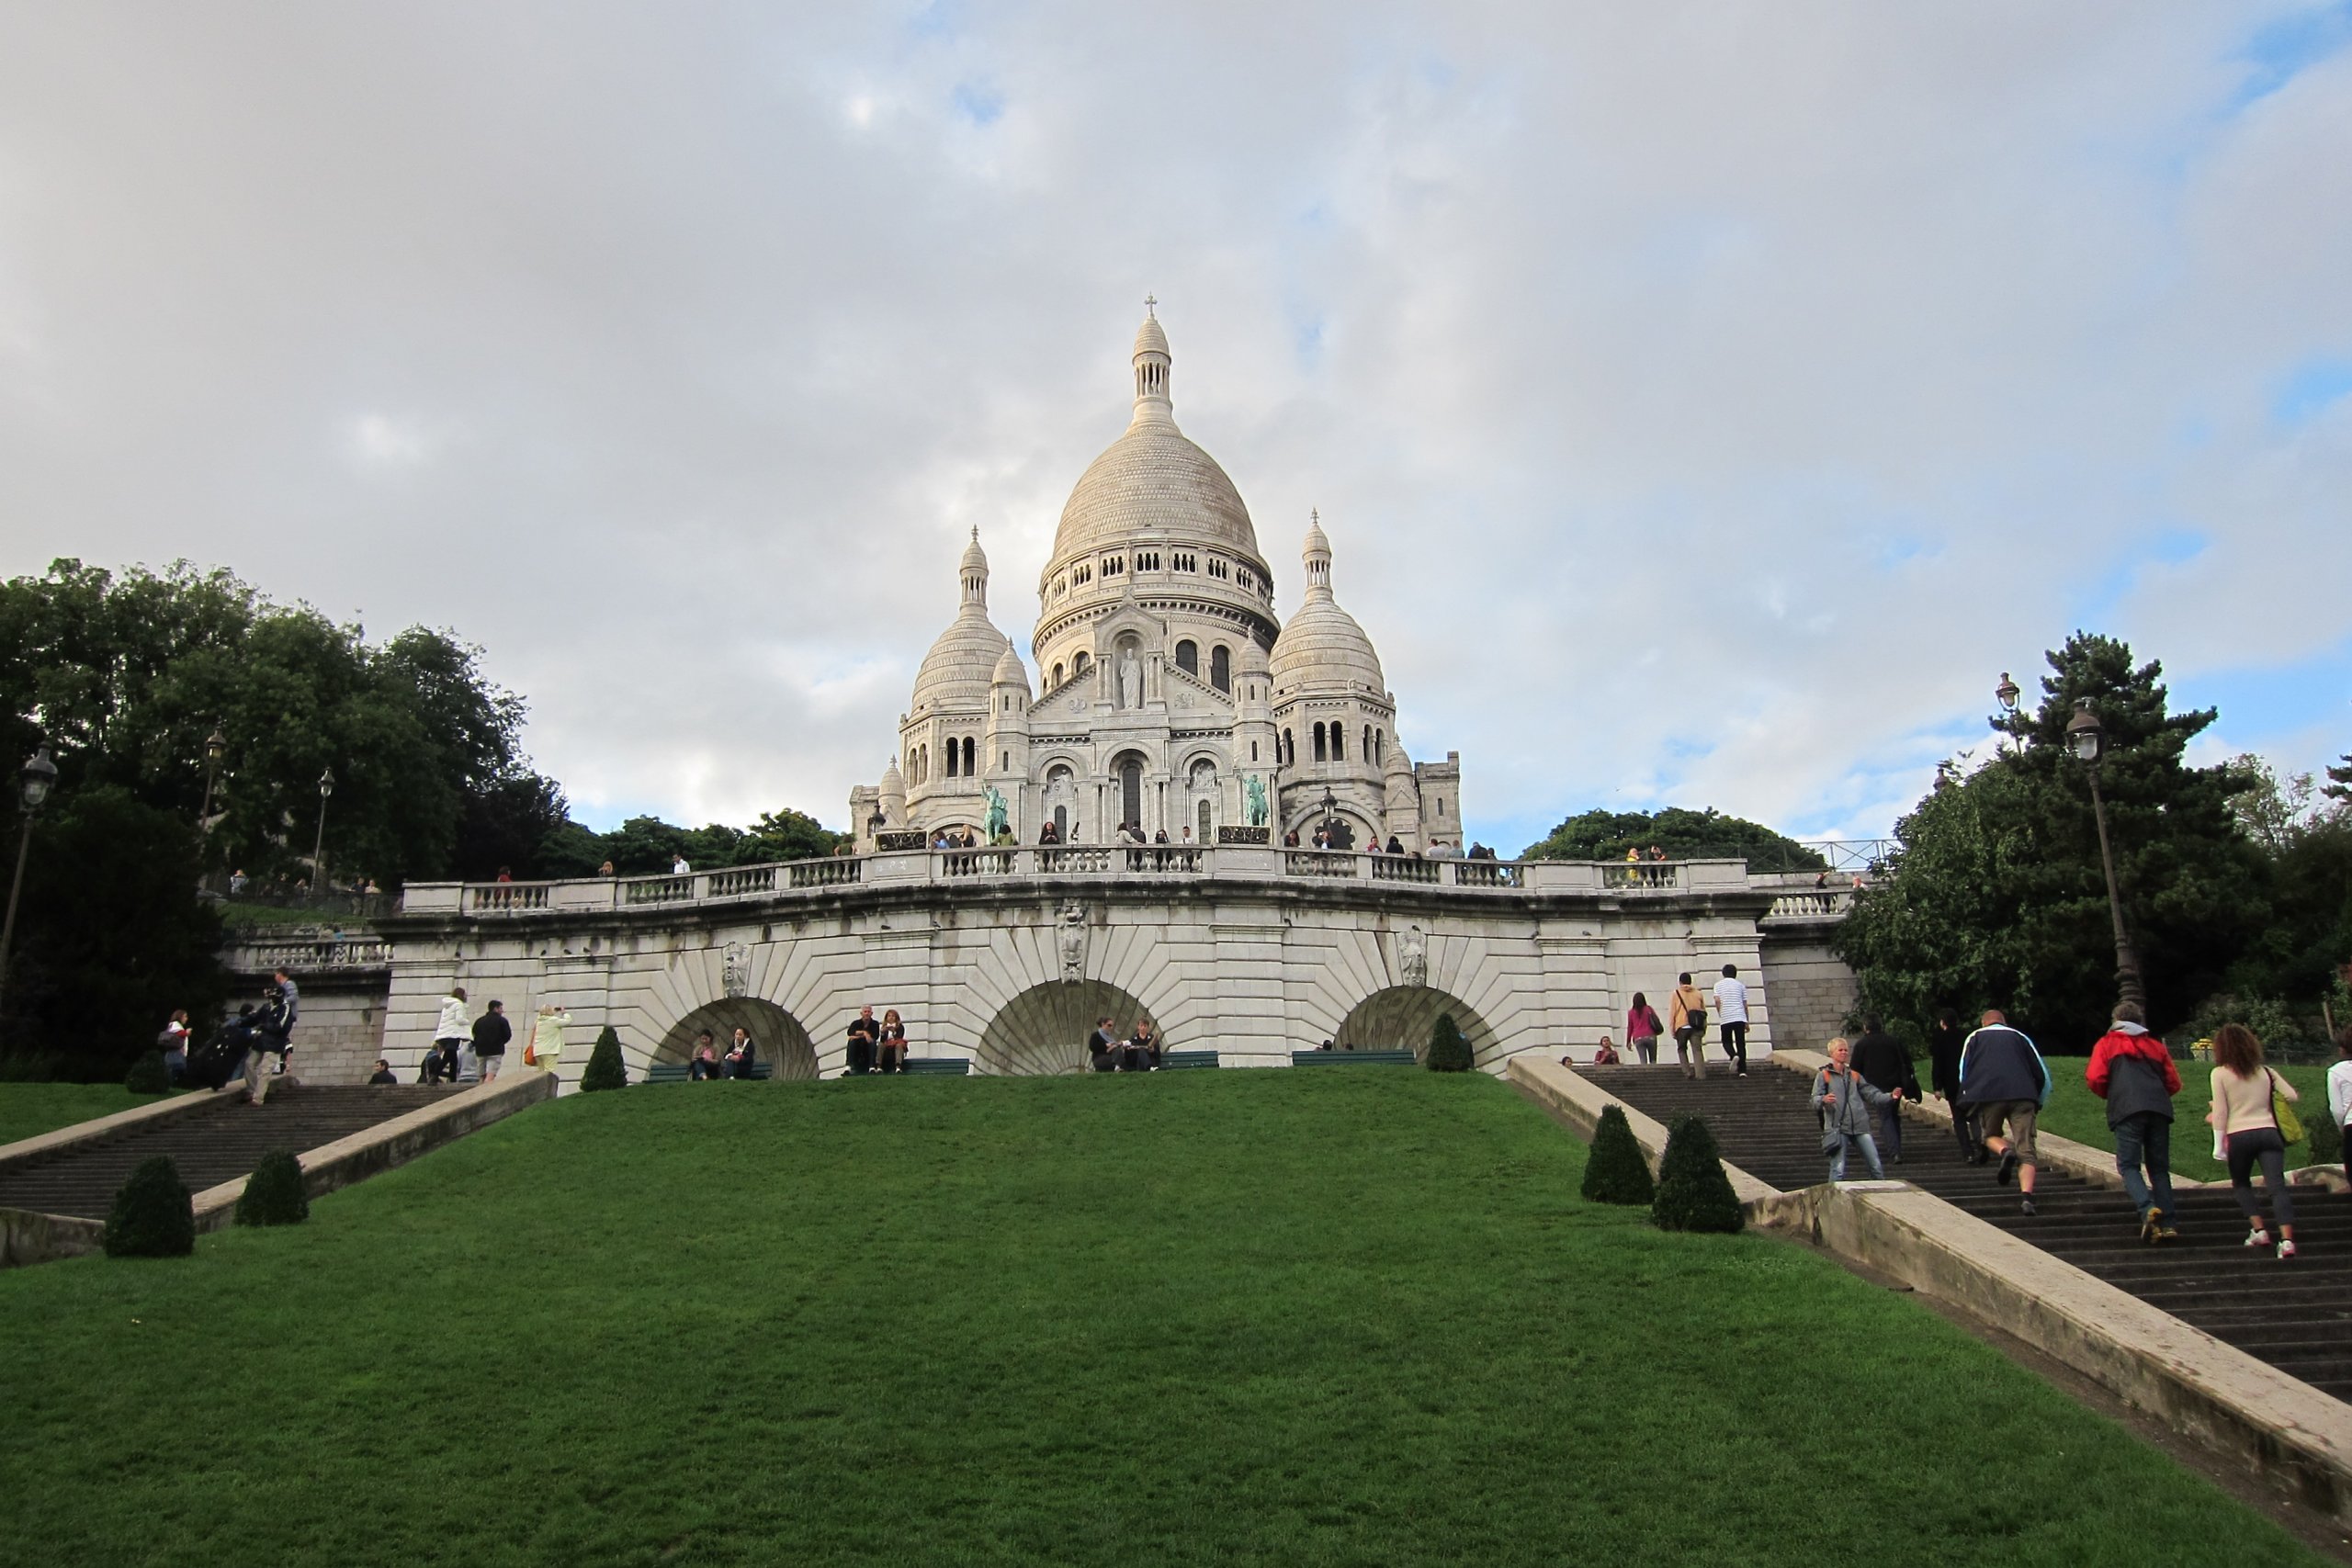 The Sacre Coeur from the bottom of the hill.  A must visit in Paris.